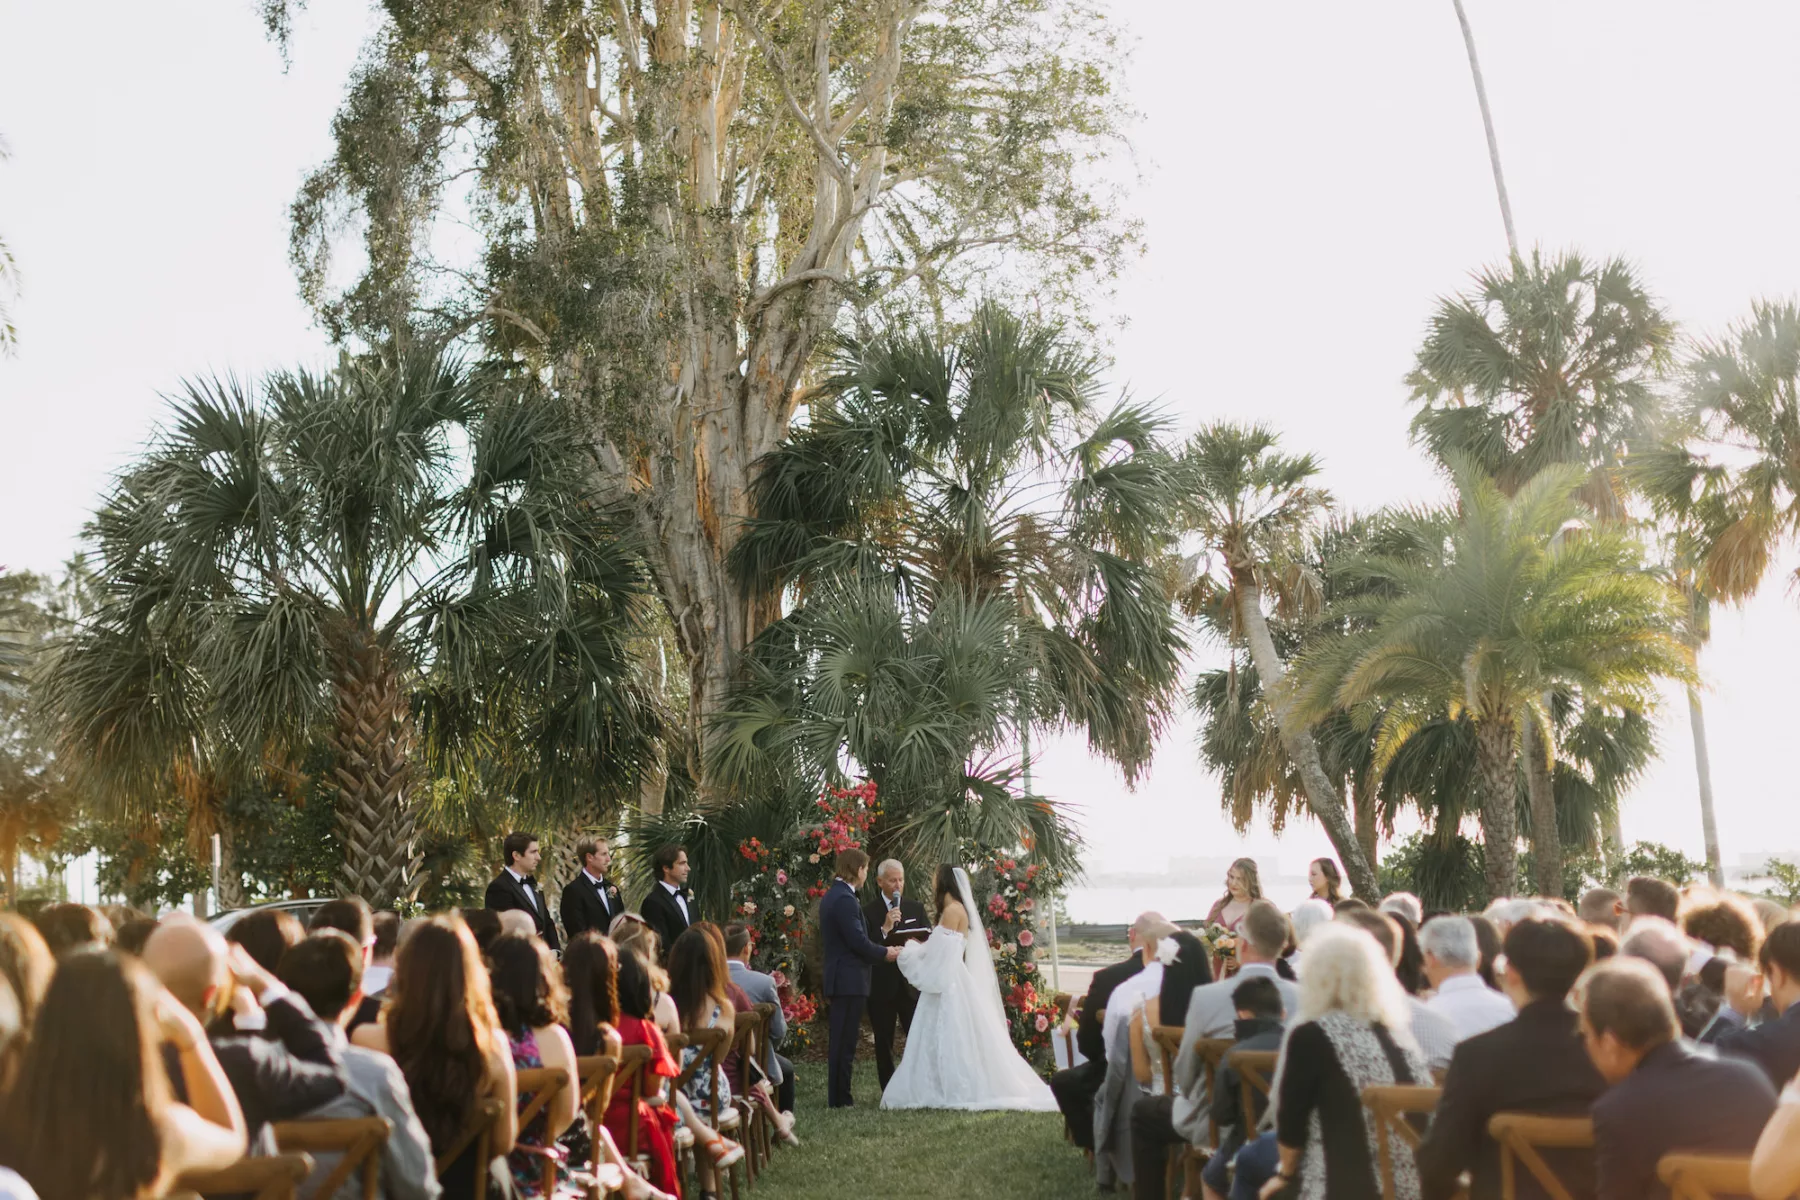 Old Florida Outdoor Fall Wedding Ceremony Inspiration | Tampa Bay Photographer Amber McWhorter Photography | Planner Coastal Coordinating | Venue The Fenway